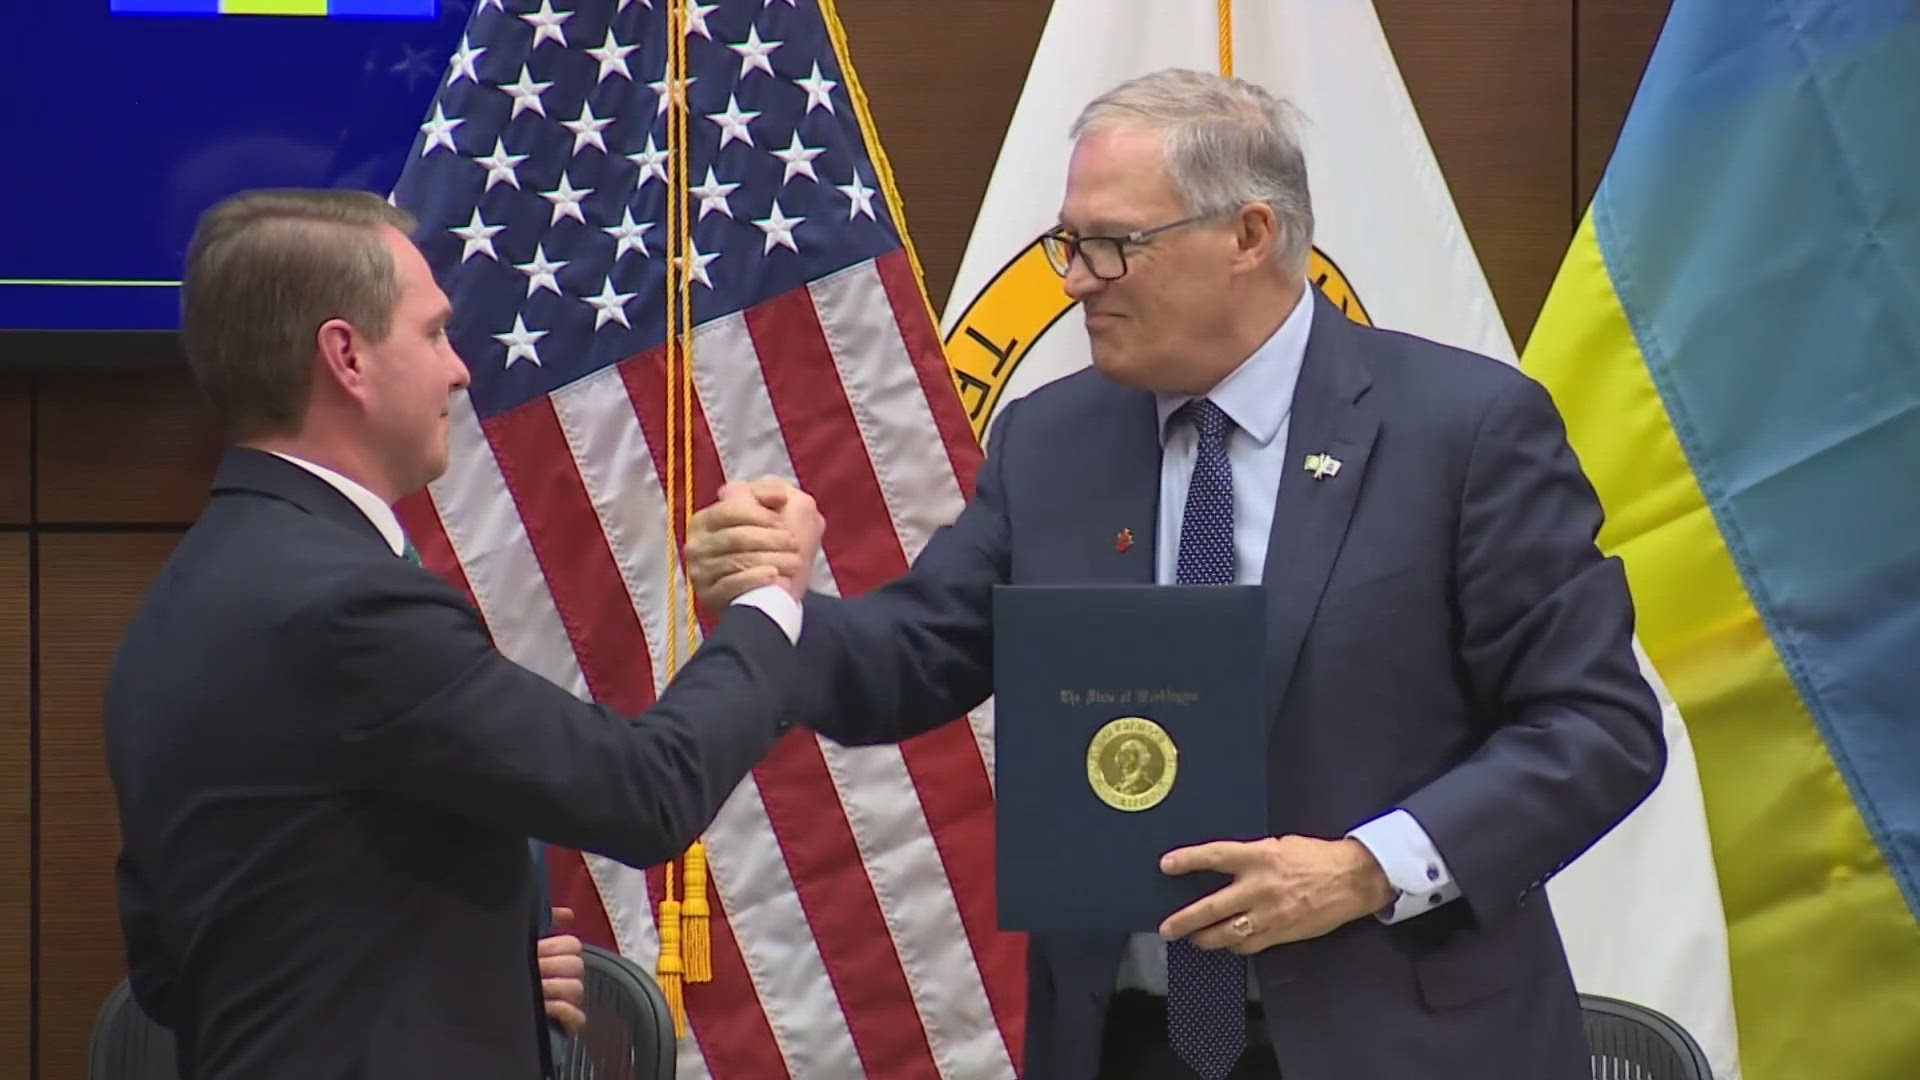 Gov. Jay Inslee met with his Ukrainian counterpart in Tacoma City Hall to sign a sister state agreement with the Kyiv region of Ukraine.